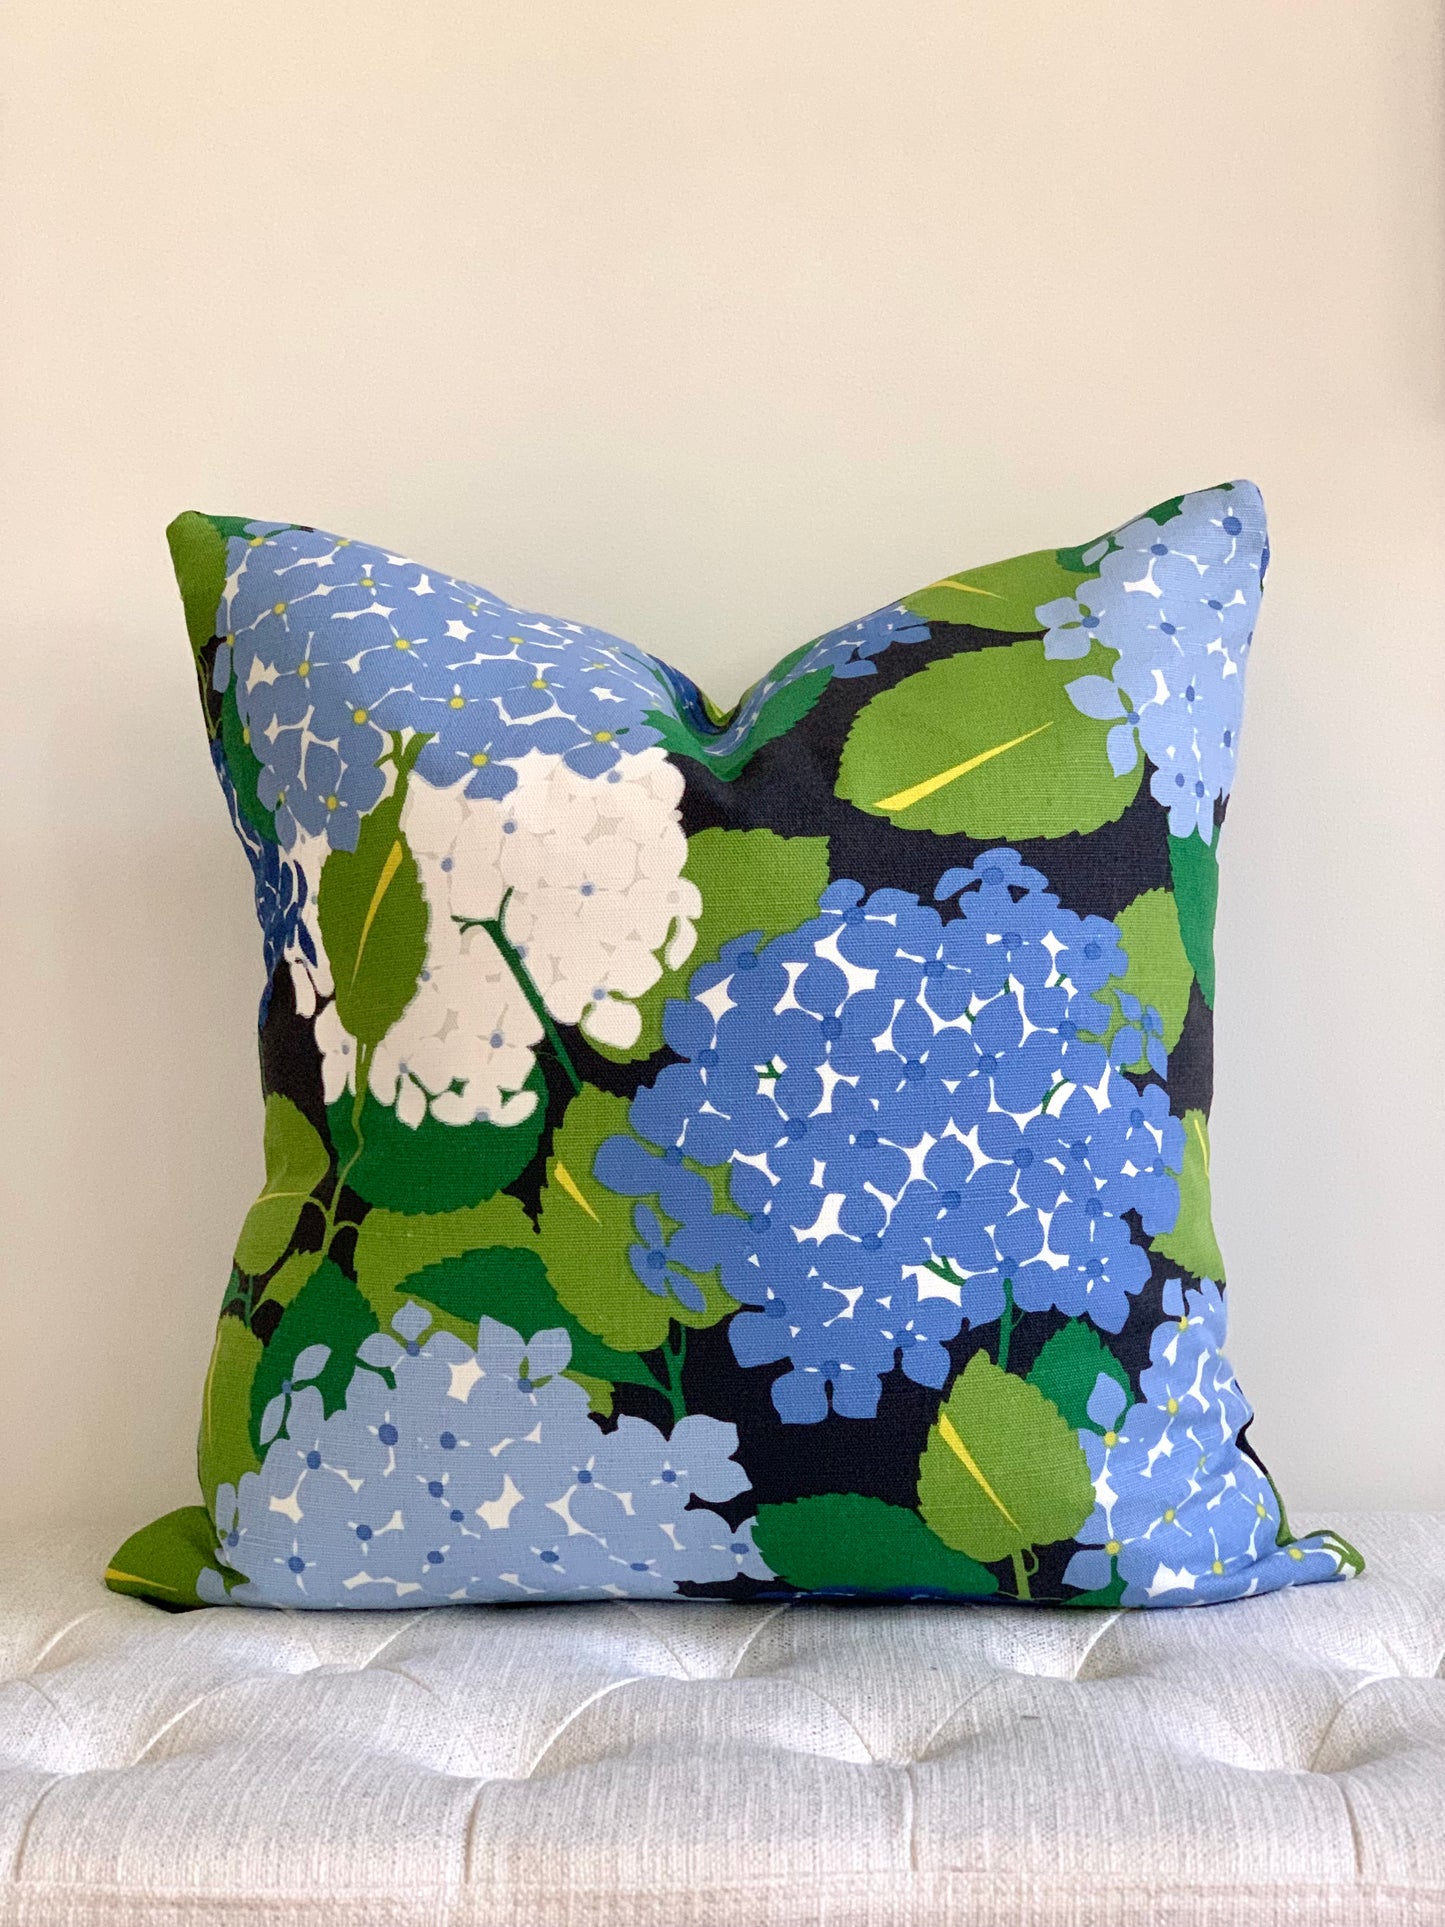 Hydrangea floral designer pillow in blue, purple and green